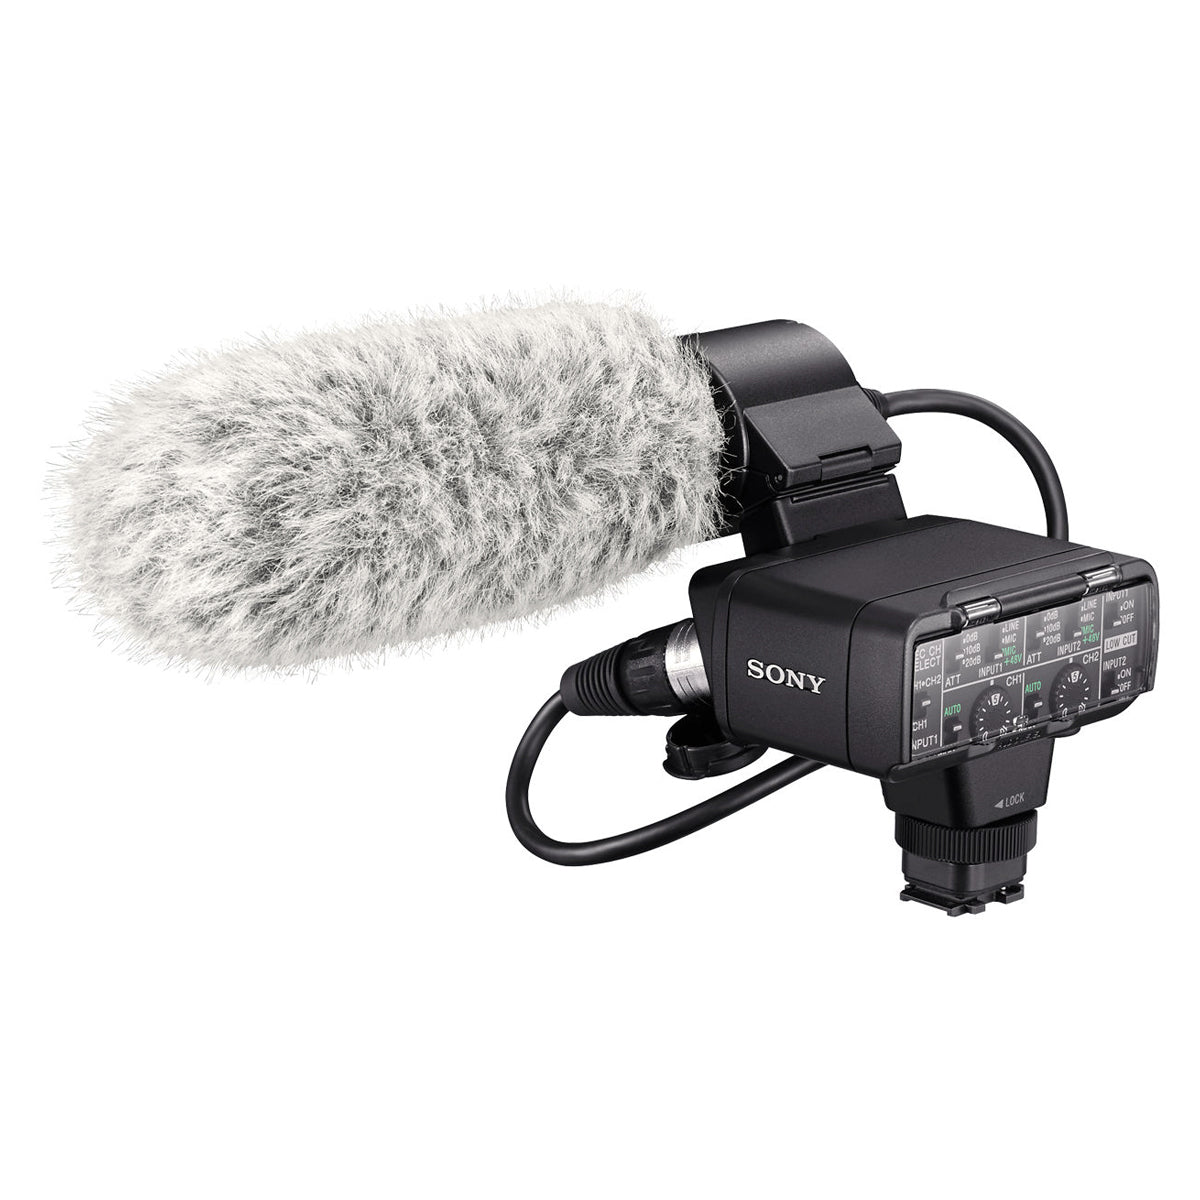 Sony XLR-K2M Adapter Kit with Microphone